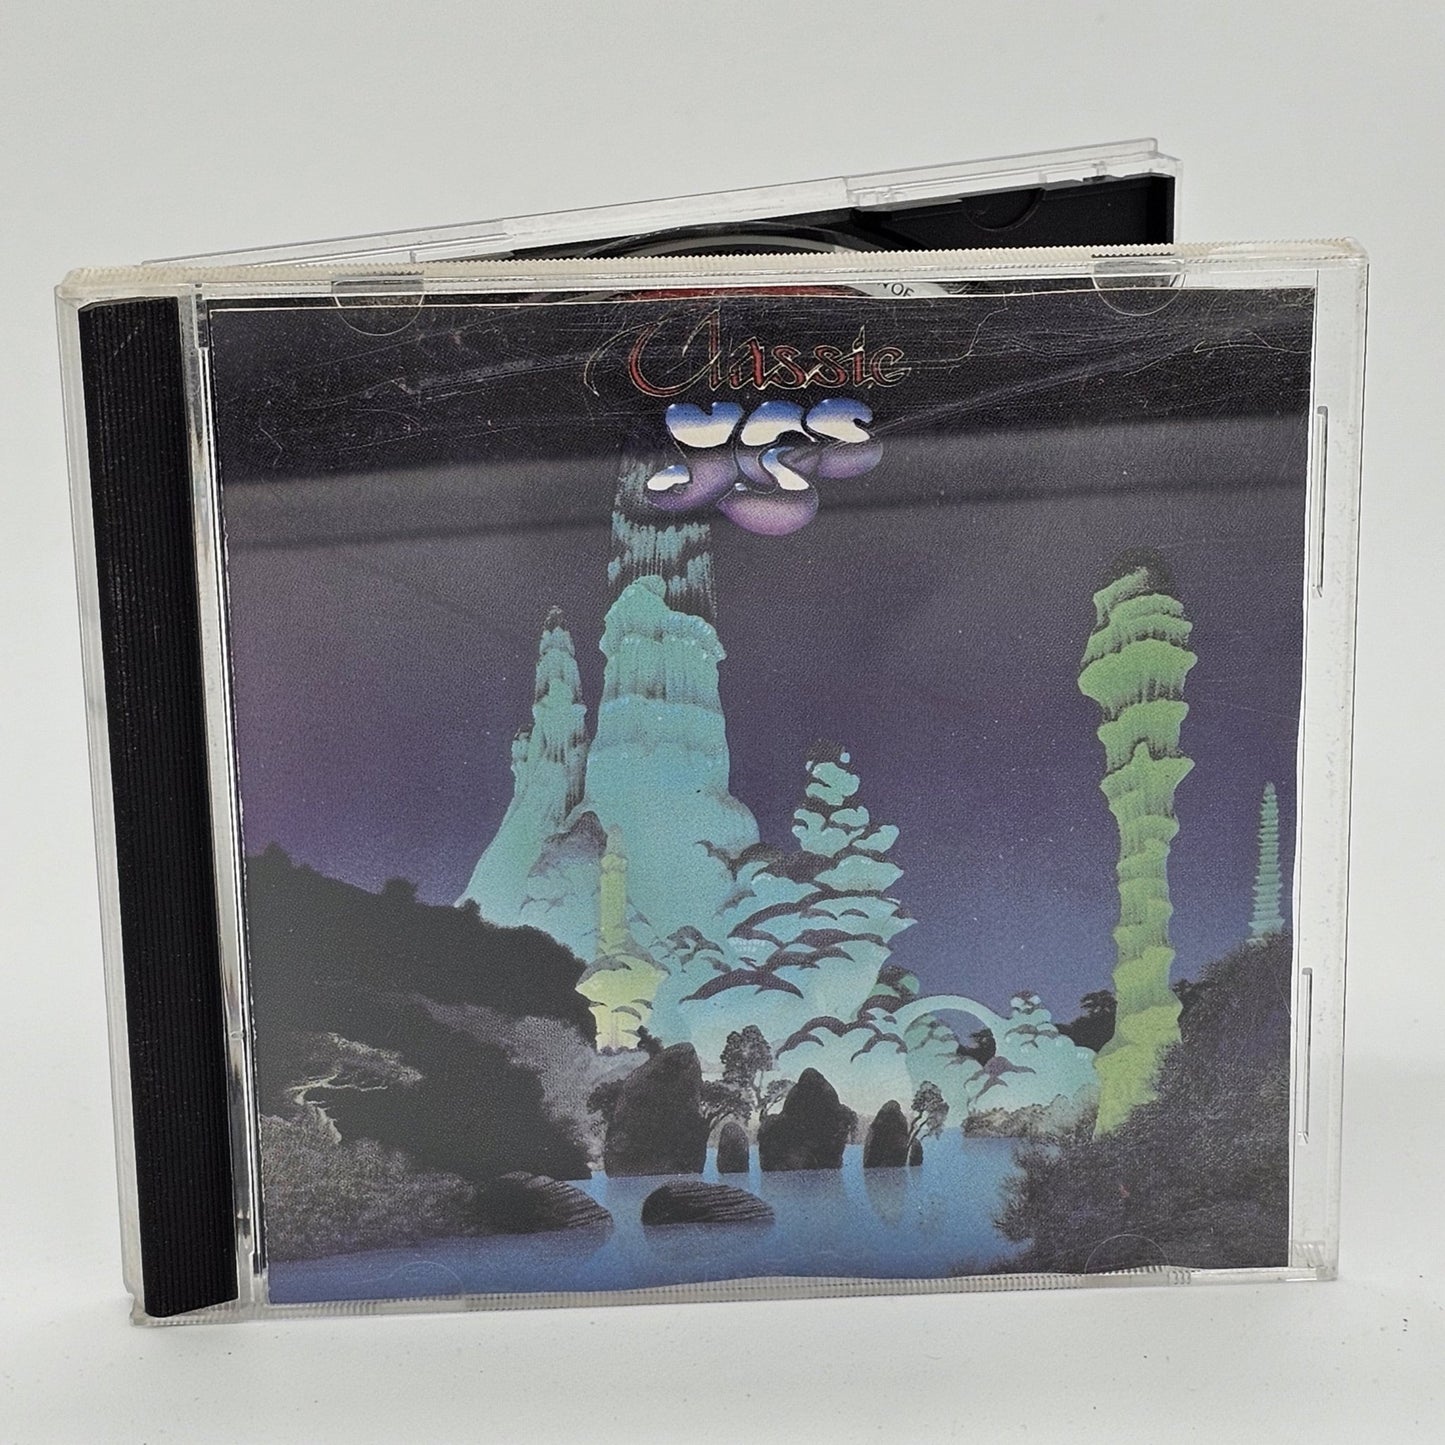 Atlantic - Yes | Classic Yes | CD - Compact Disc - Steady Bunny Shop